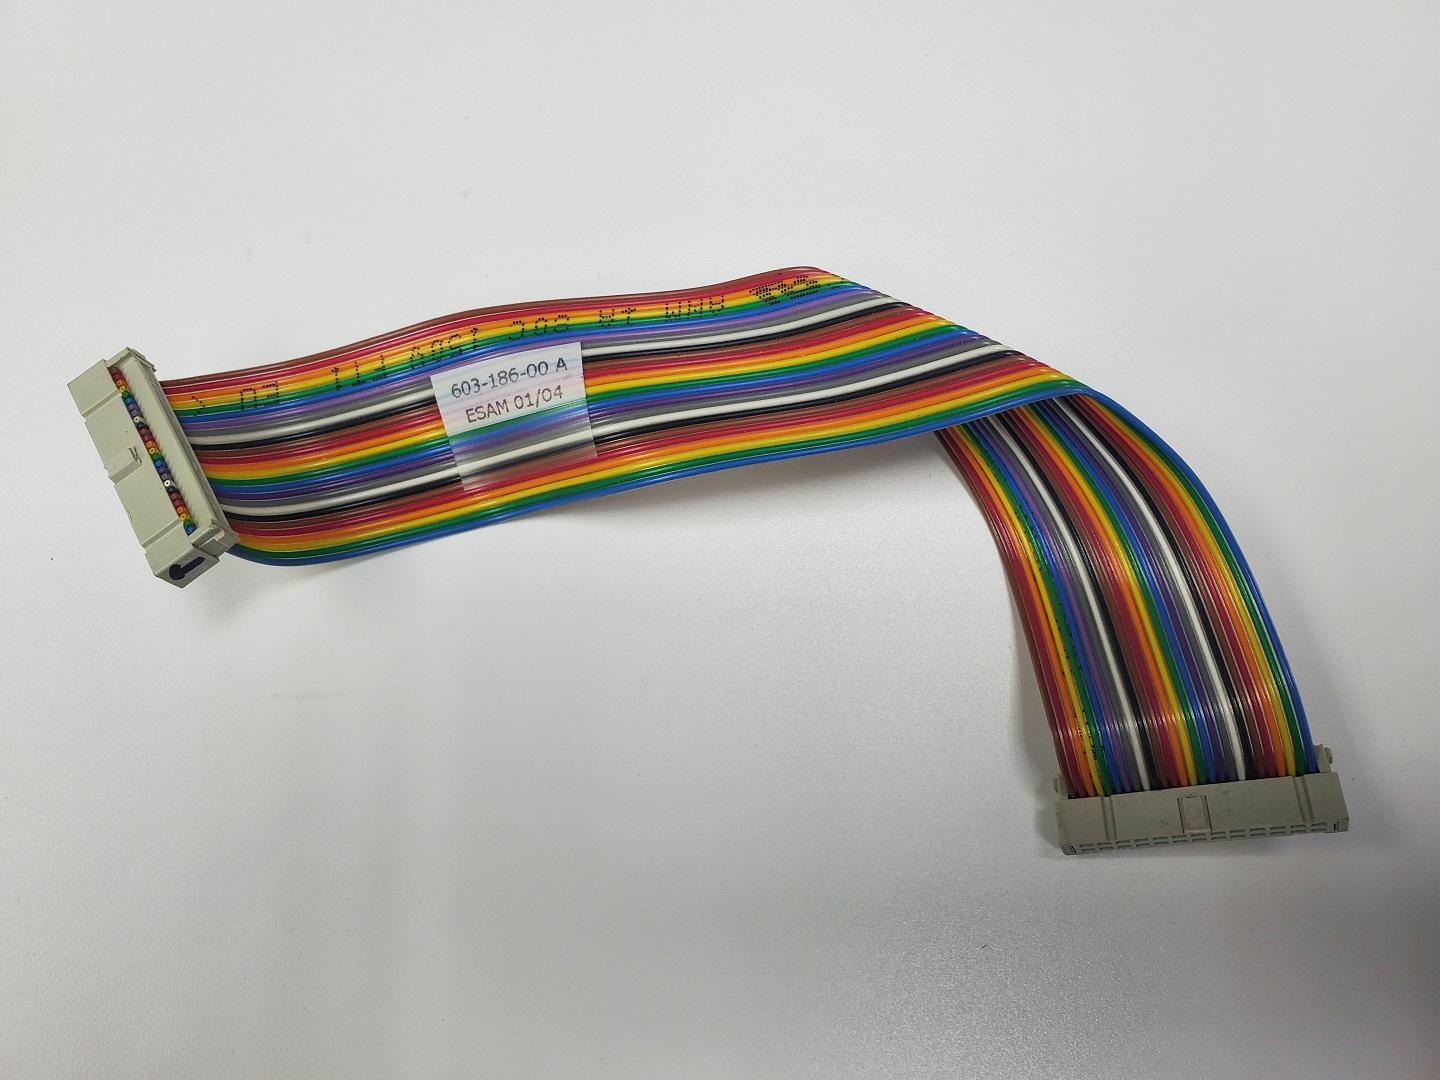 IGT 603-186-00 A RIBBON CABLE FOR S2000 SLOT MACHINES For Sale • Gambler's  Oasis USA